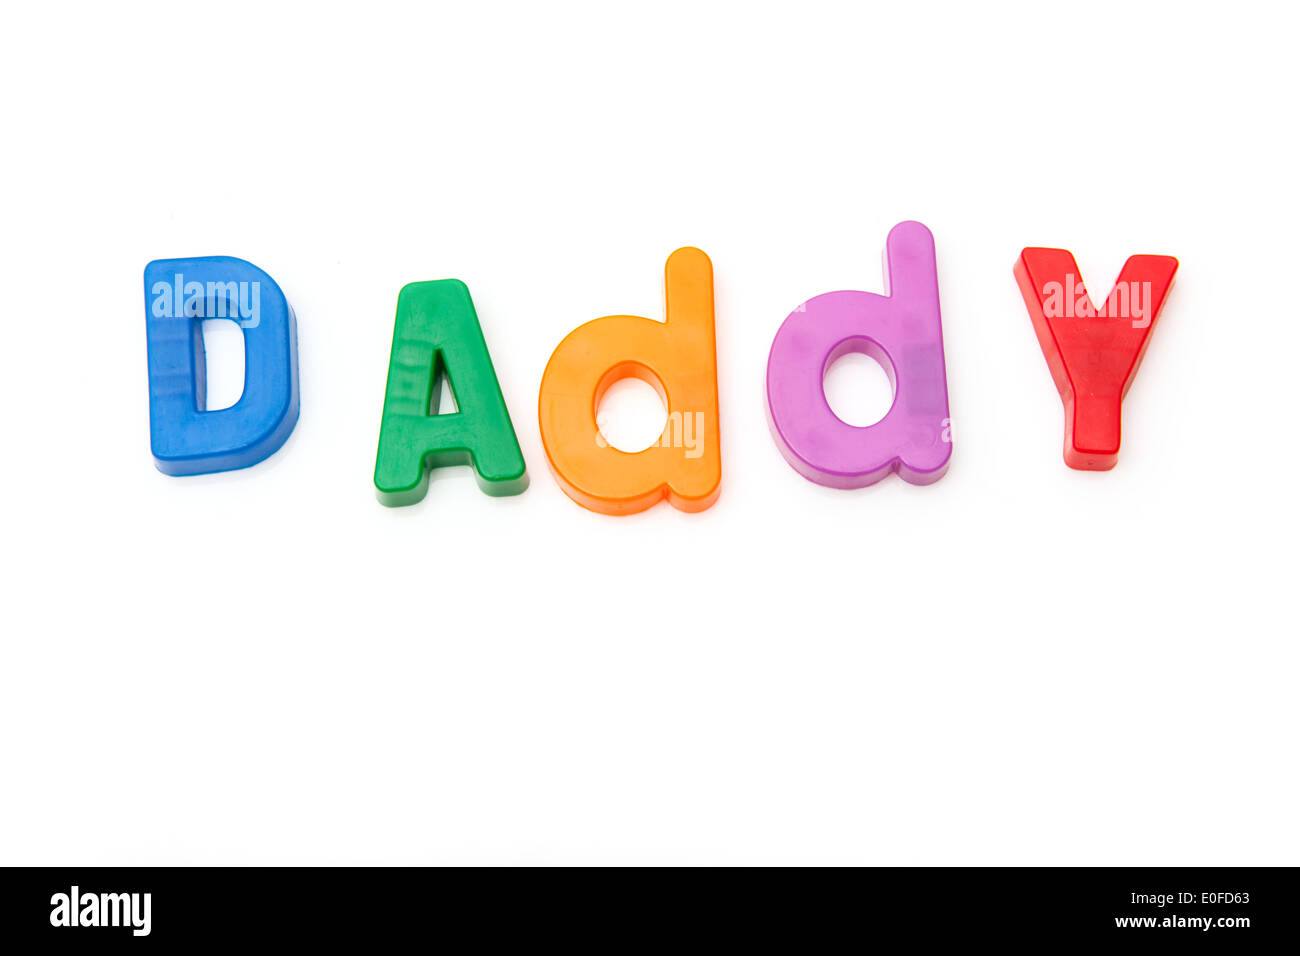 Daddy written in magnetic letters on a white studio background. Stock Photo